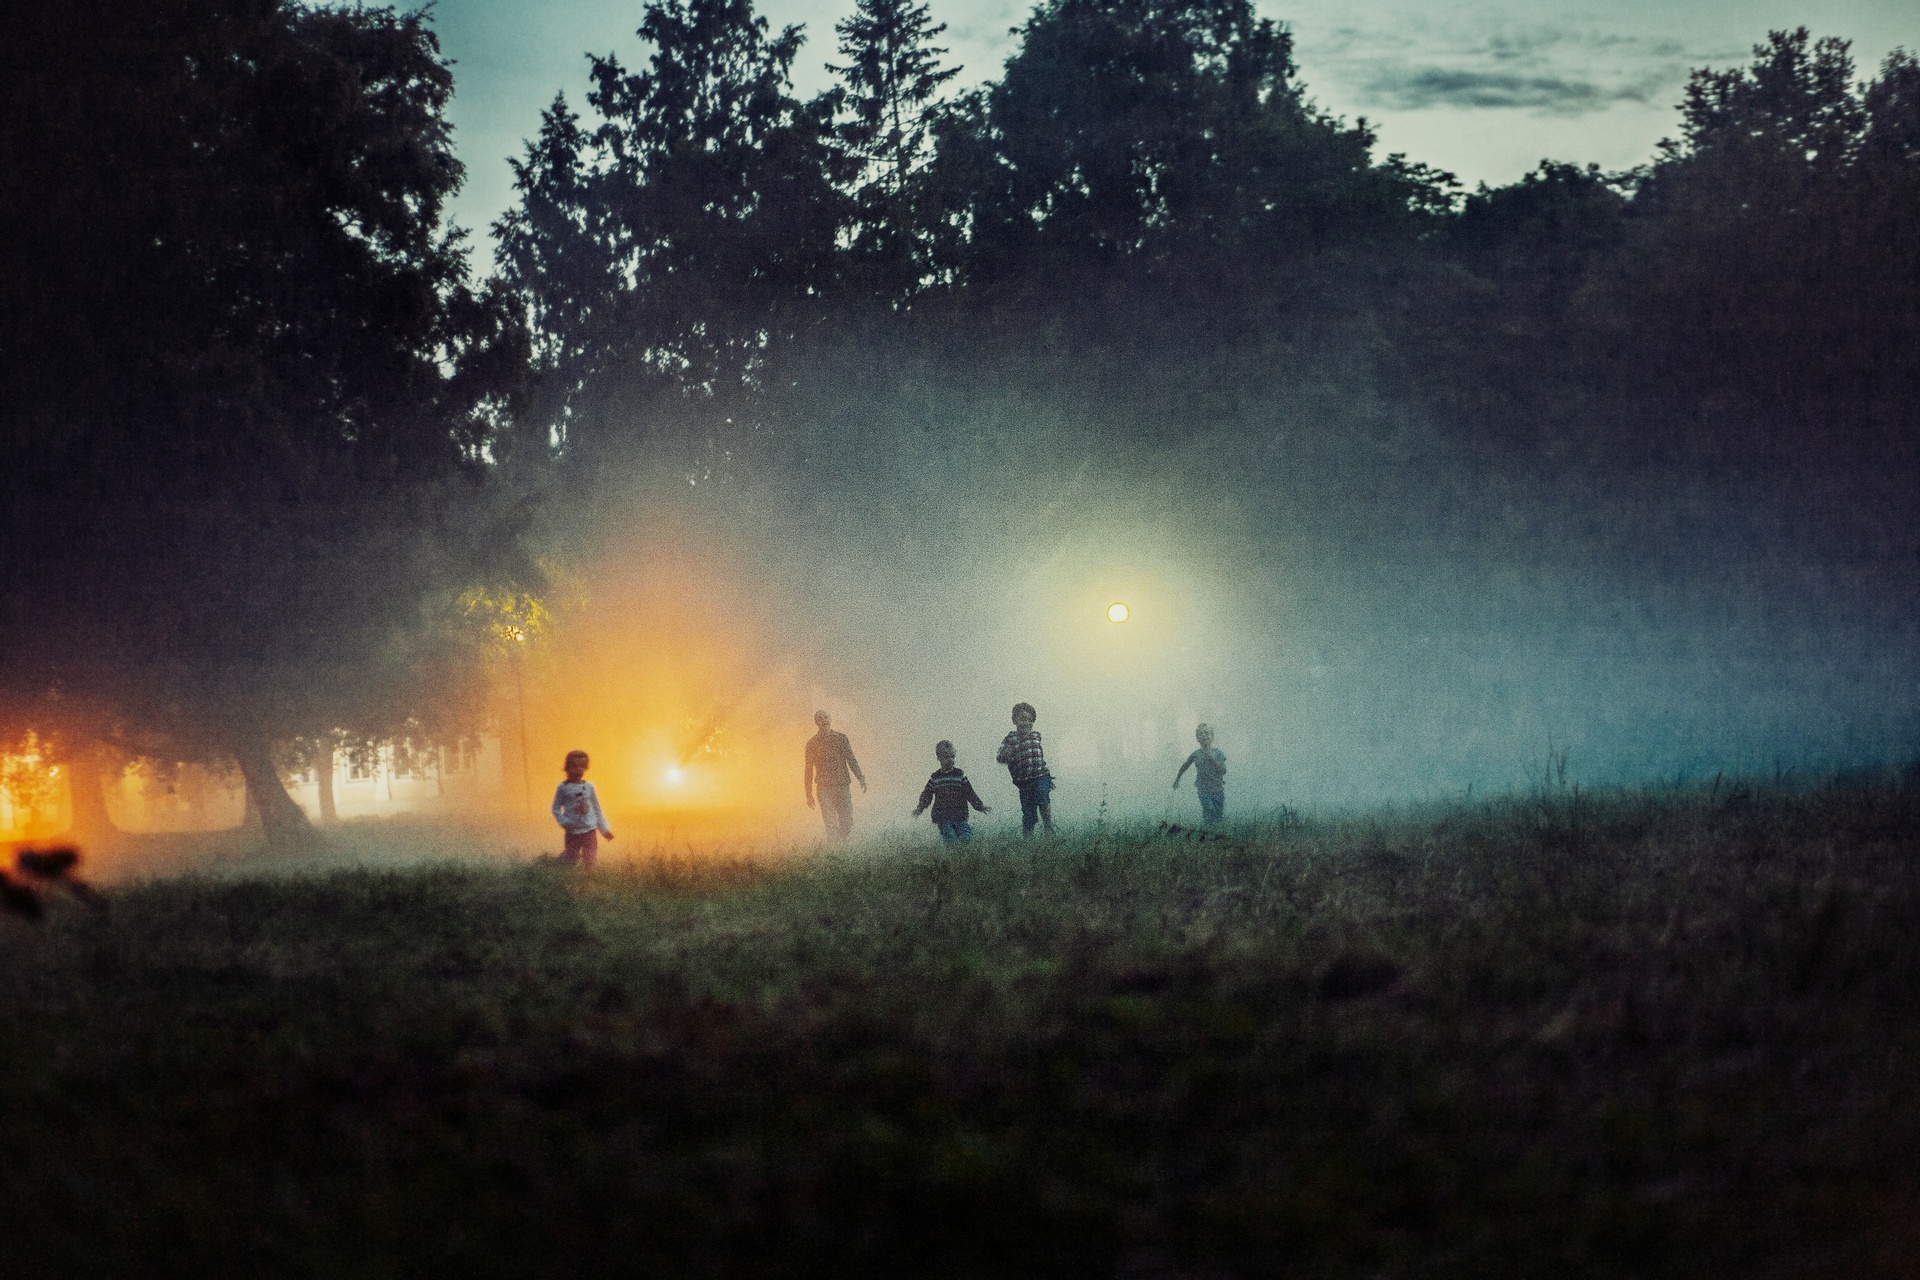 Kids play outside on Midsummer's Eve in Estonia